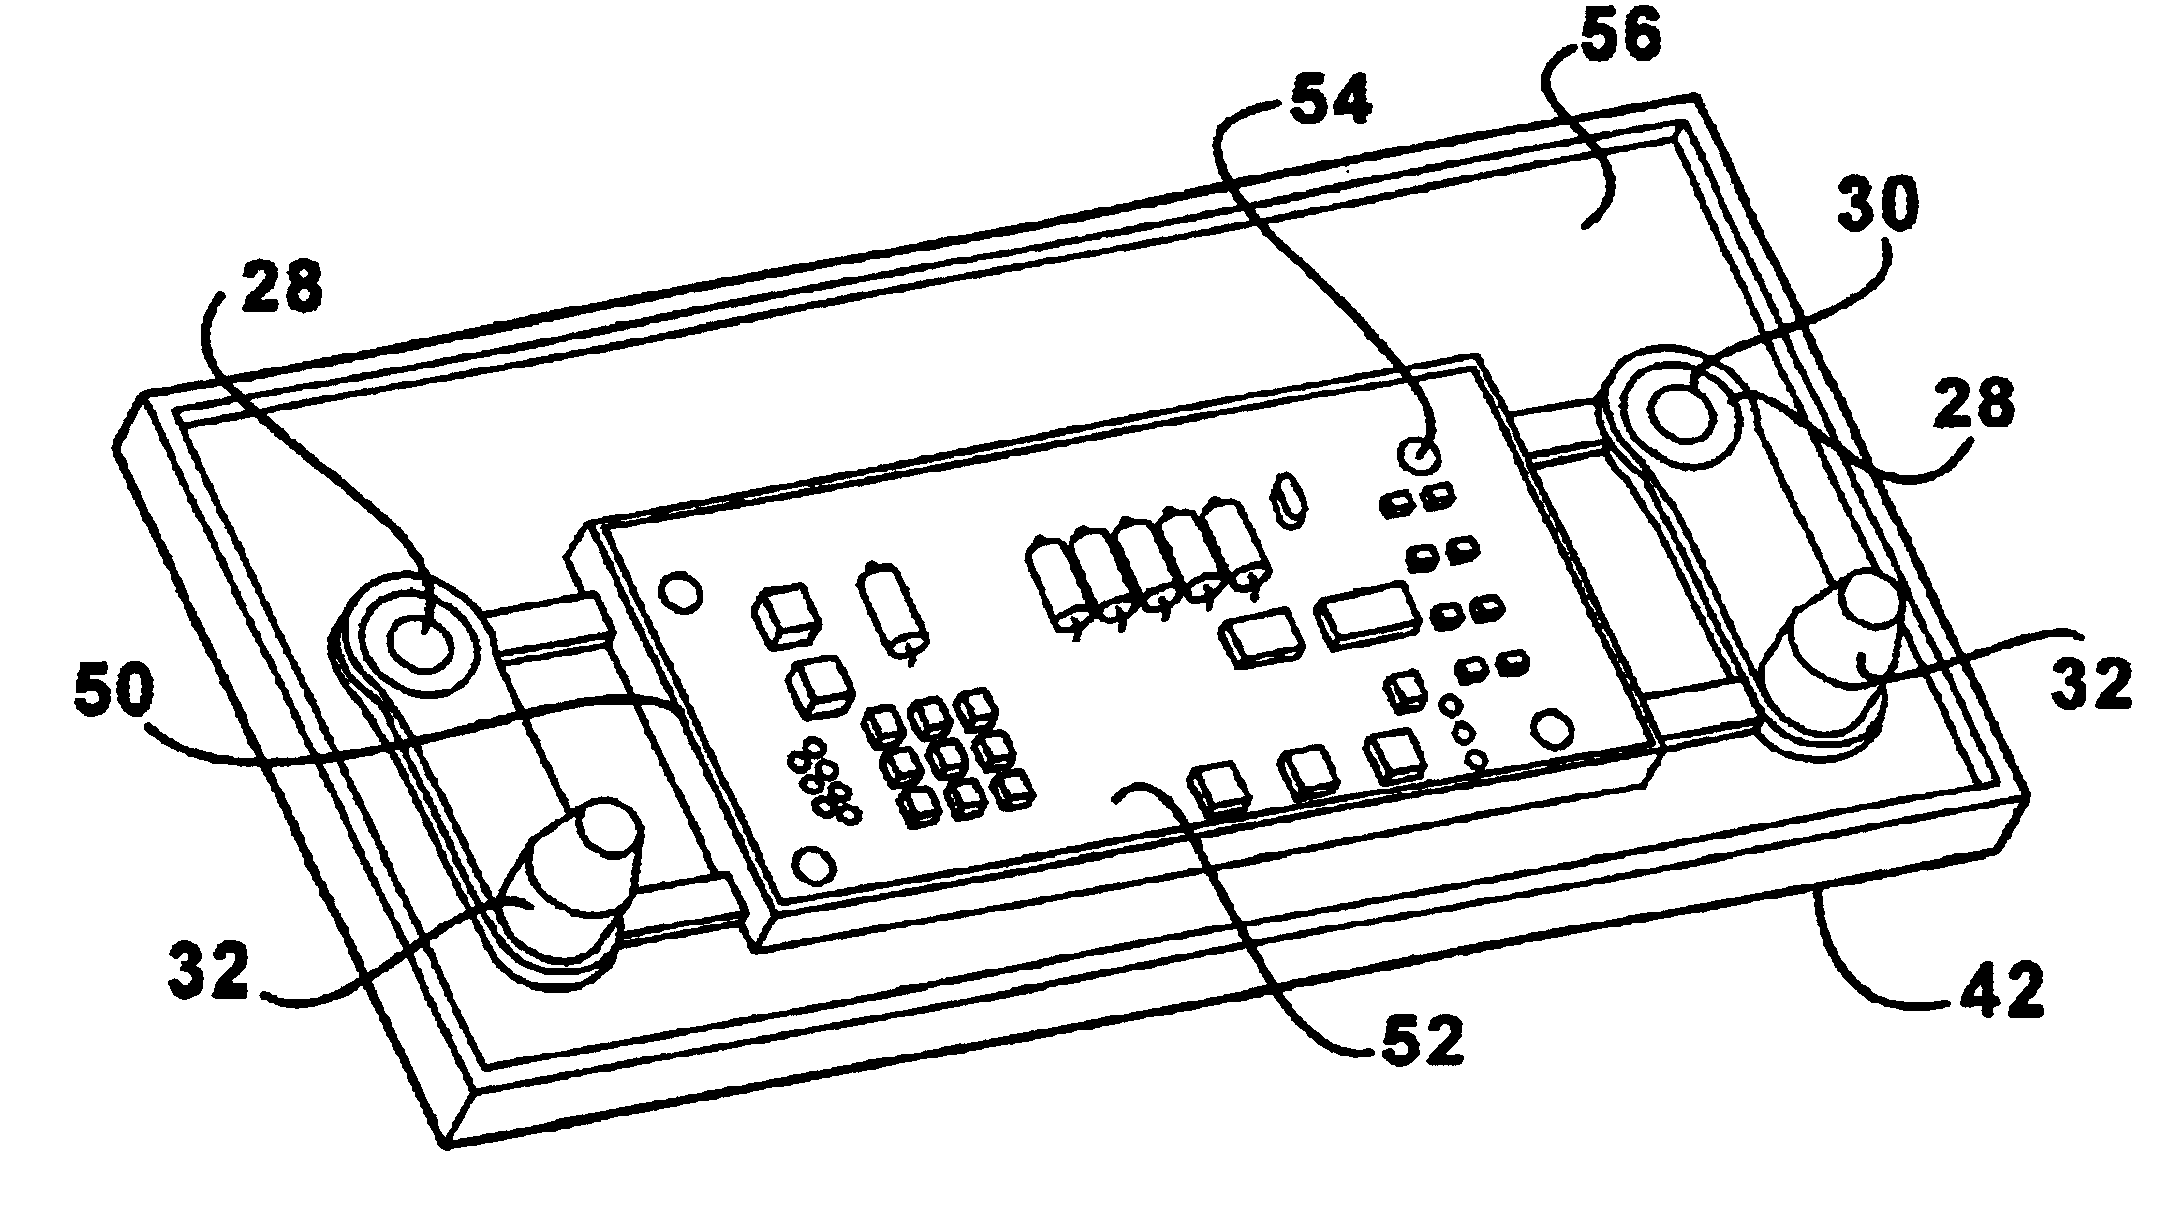 Current measuring terminal assembly for a battery